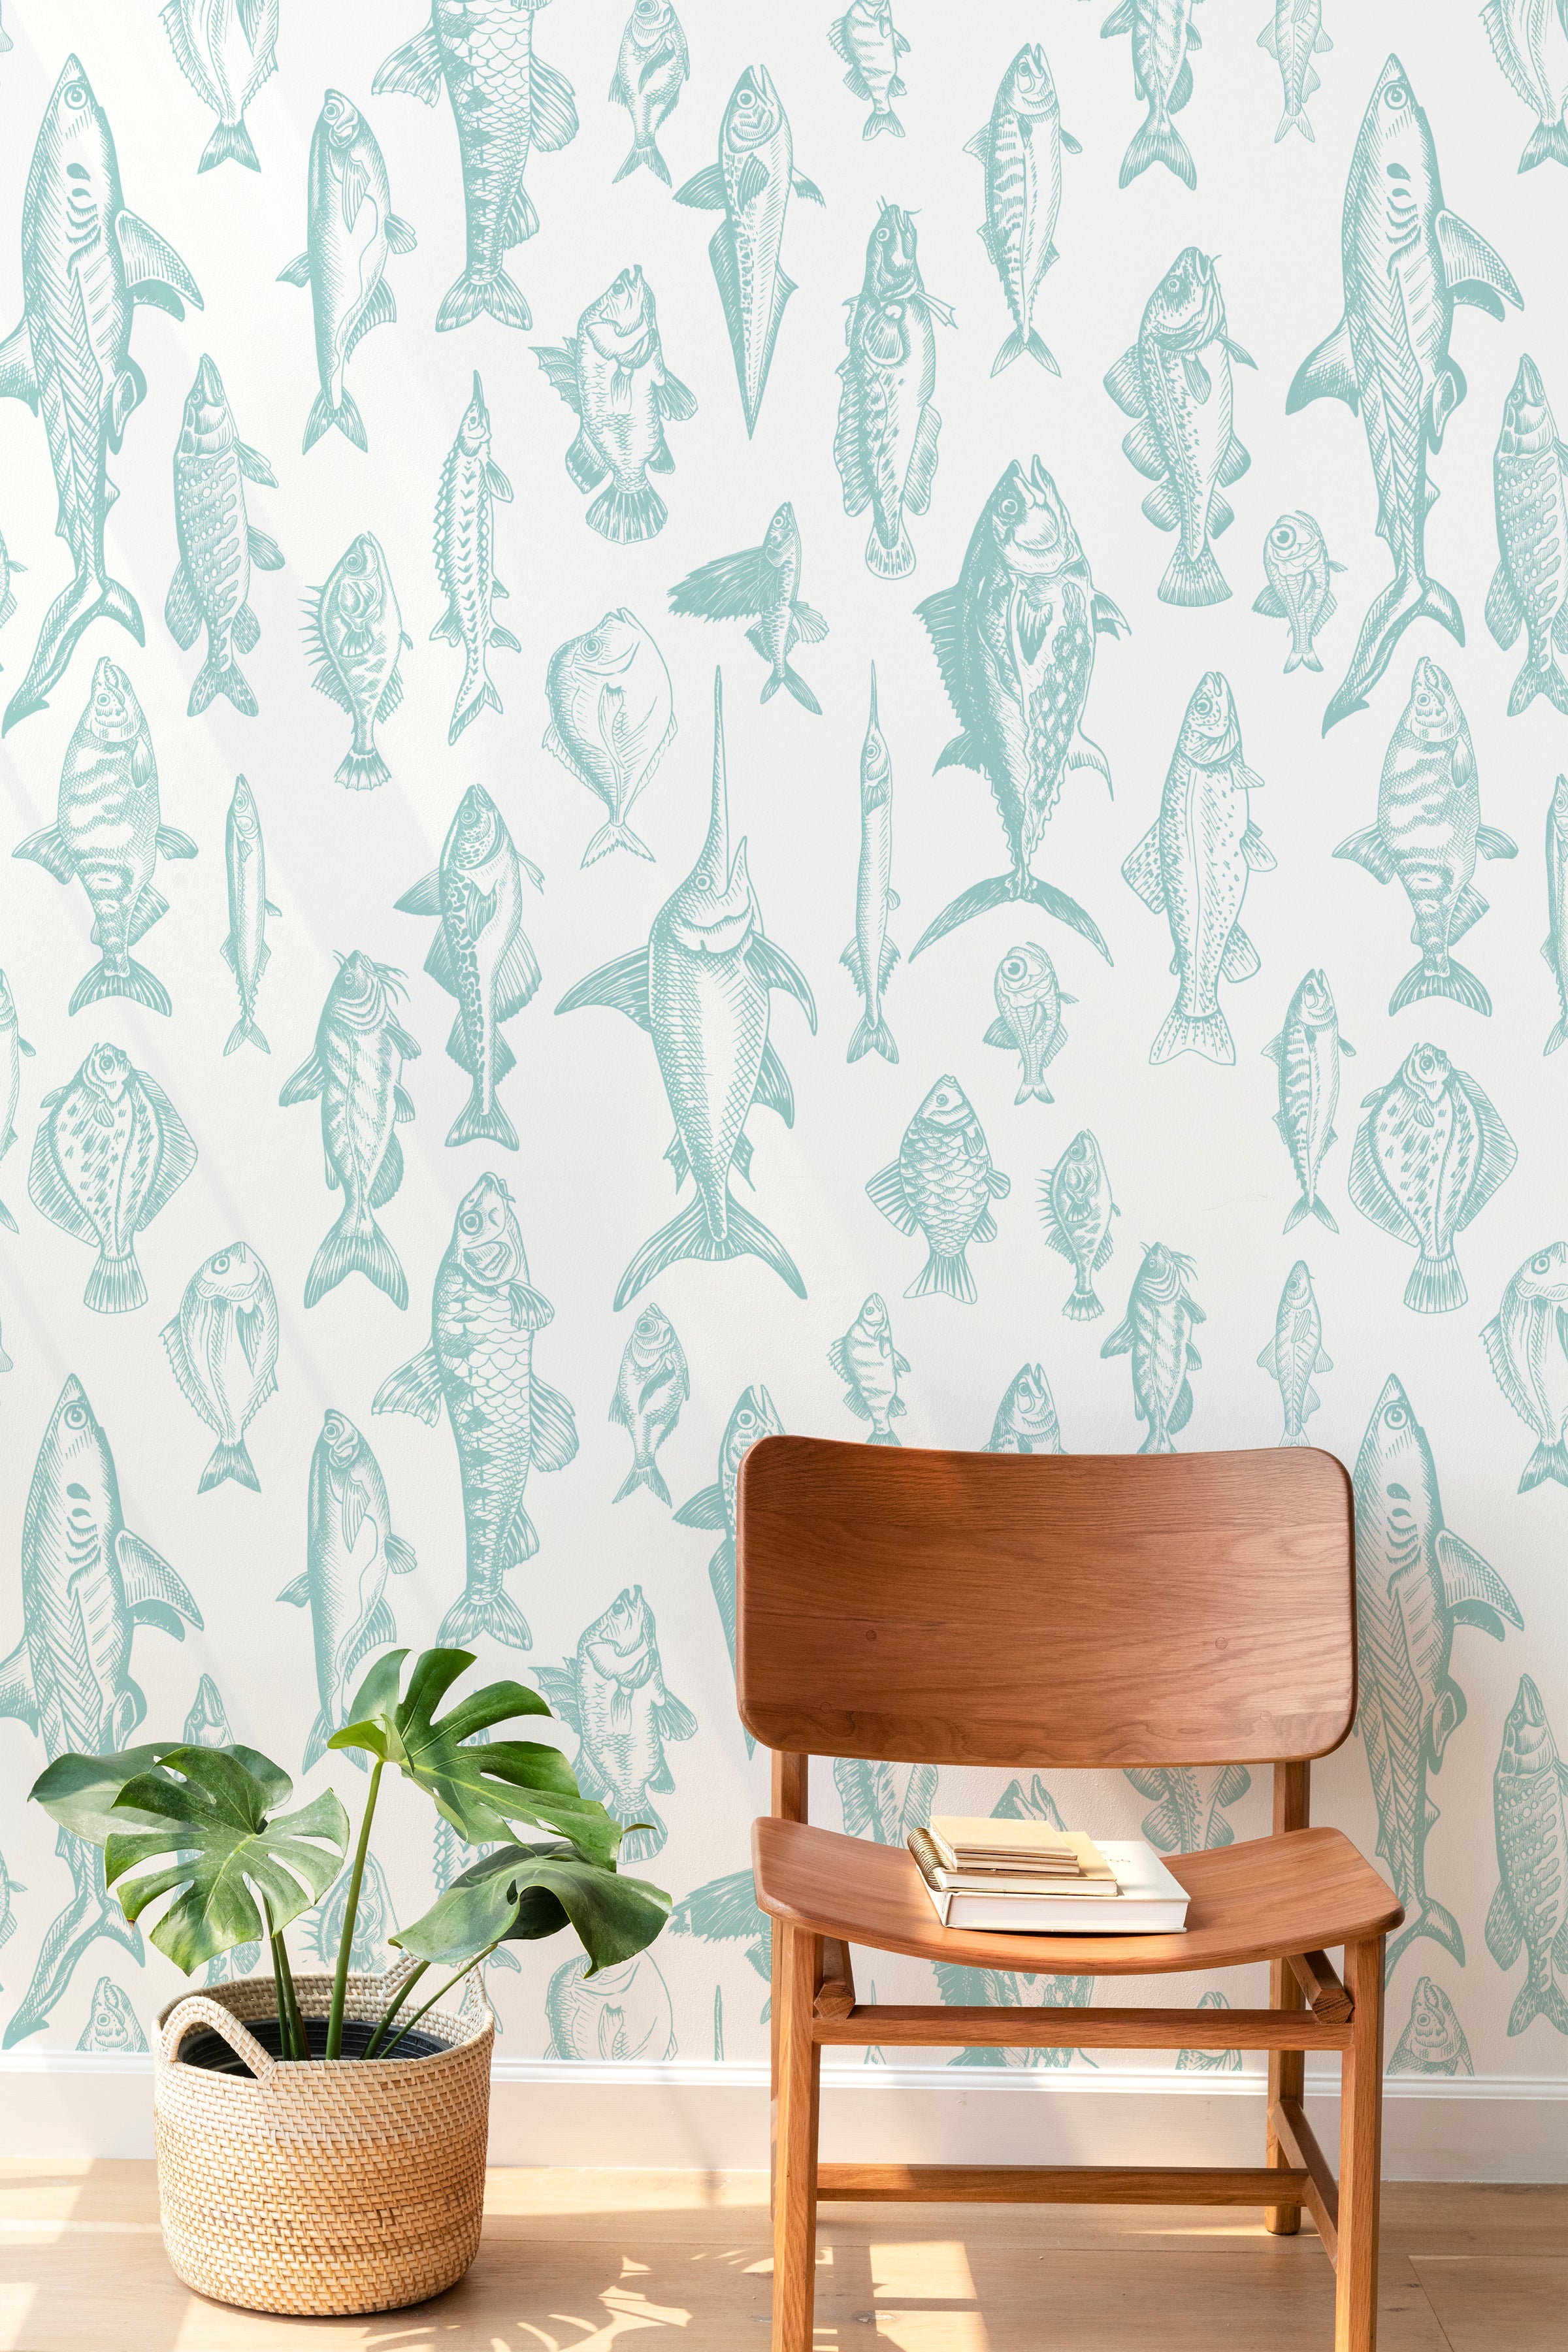 Contemporary living space with a mid-century modern chair and potted plant, complemented by a wall covered in detailed fish illustrations on wallpaper.